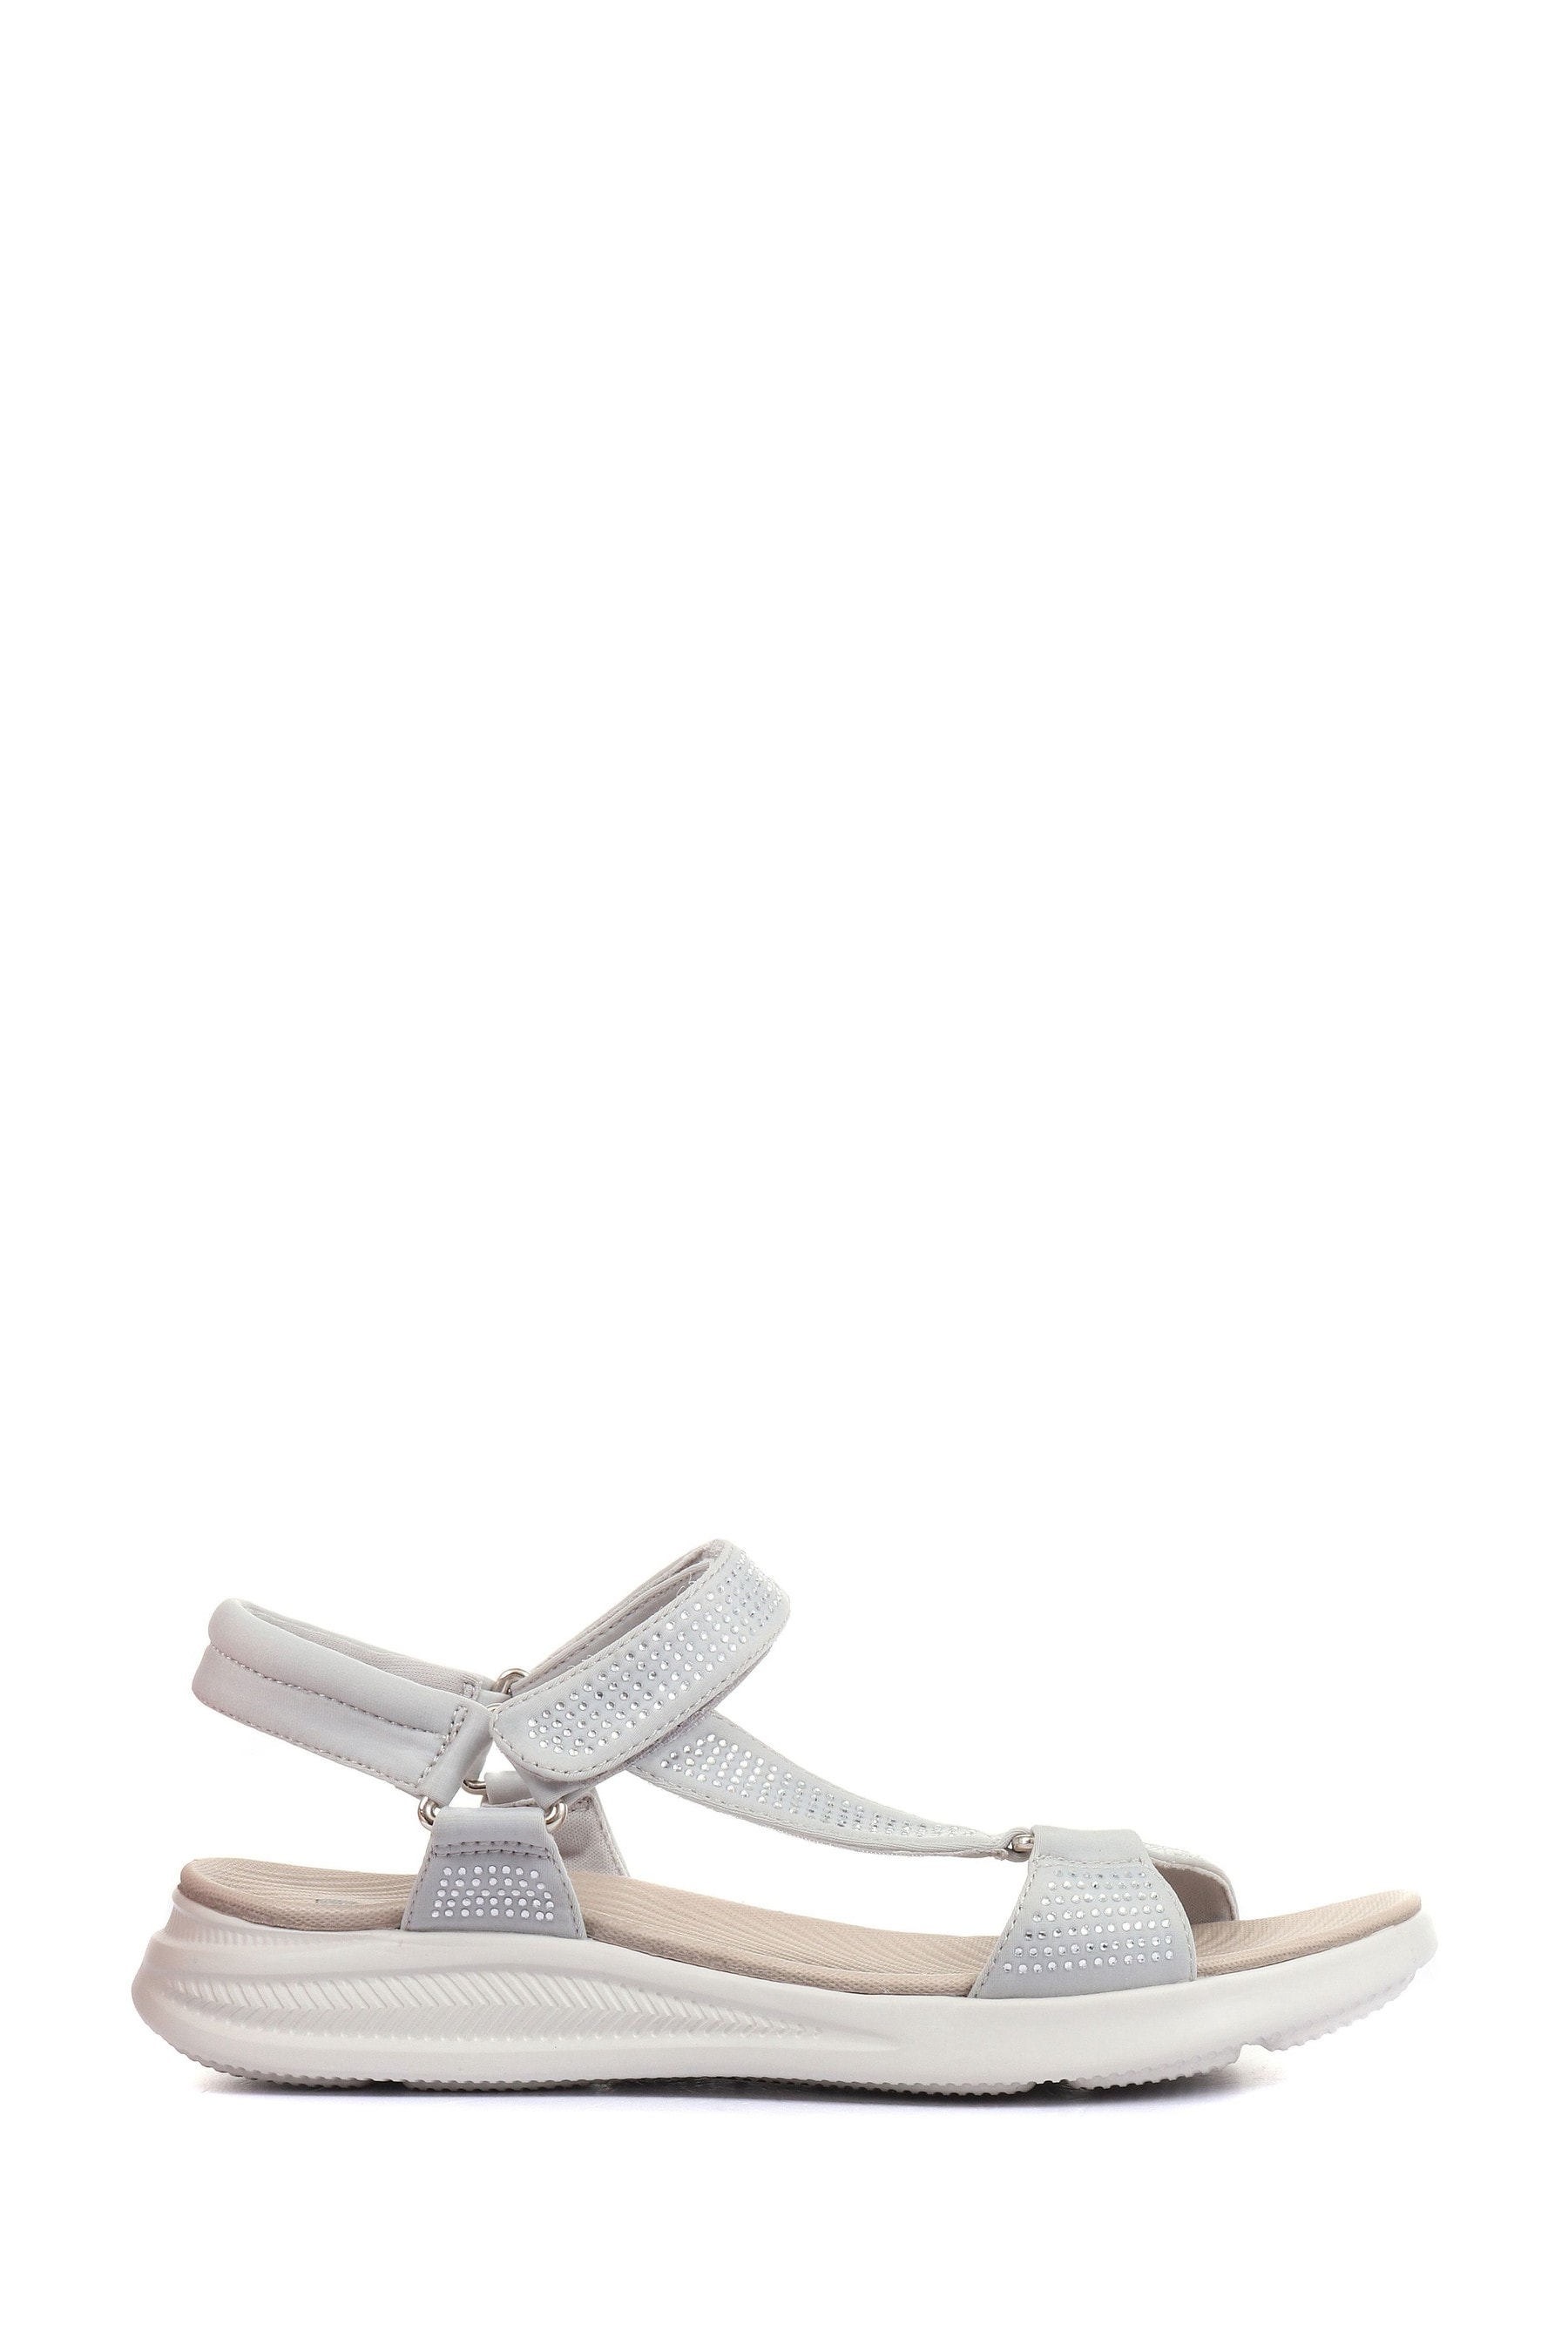 Buy Pavers Grey Ladies Lightweight Sandals from the Next UK online shop